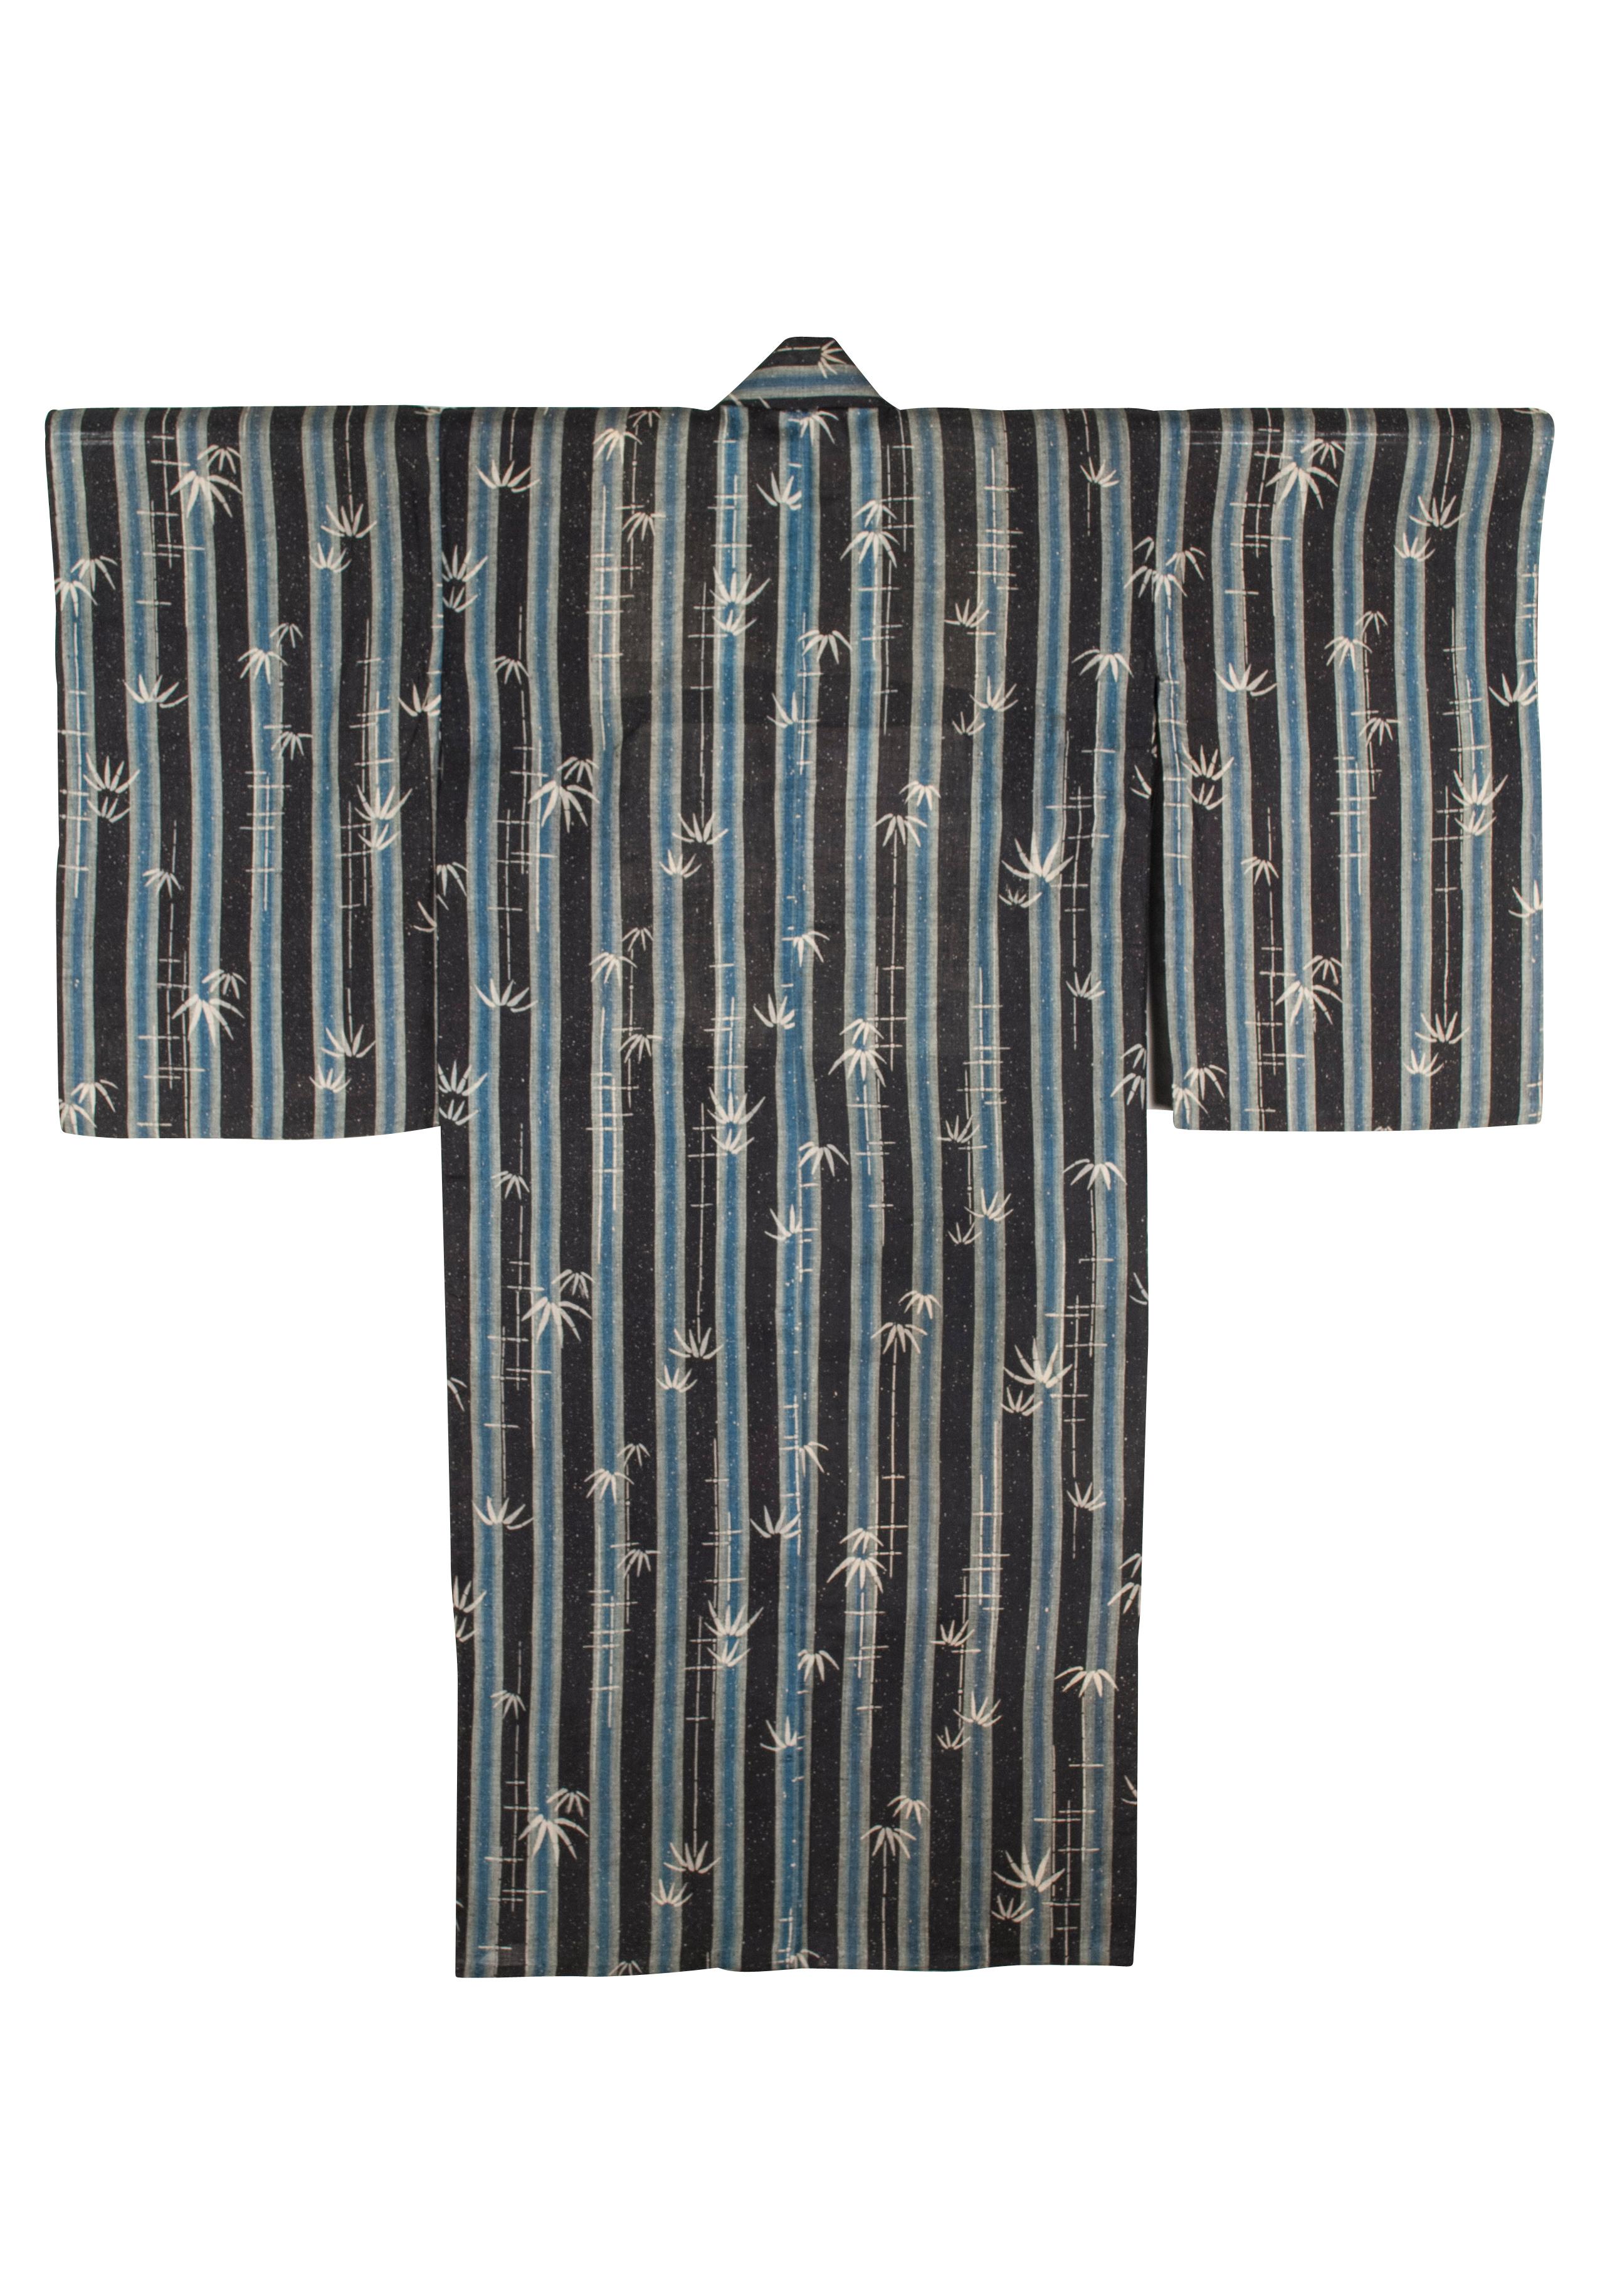 Taisho-Early Showa Period Japanese Stencil-Dyed Summer Kimono with Bamboo Motif For Sale